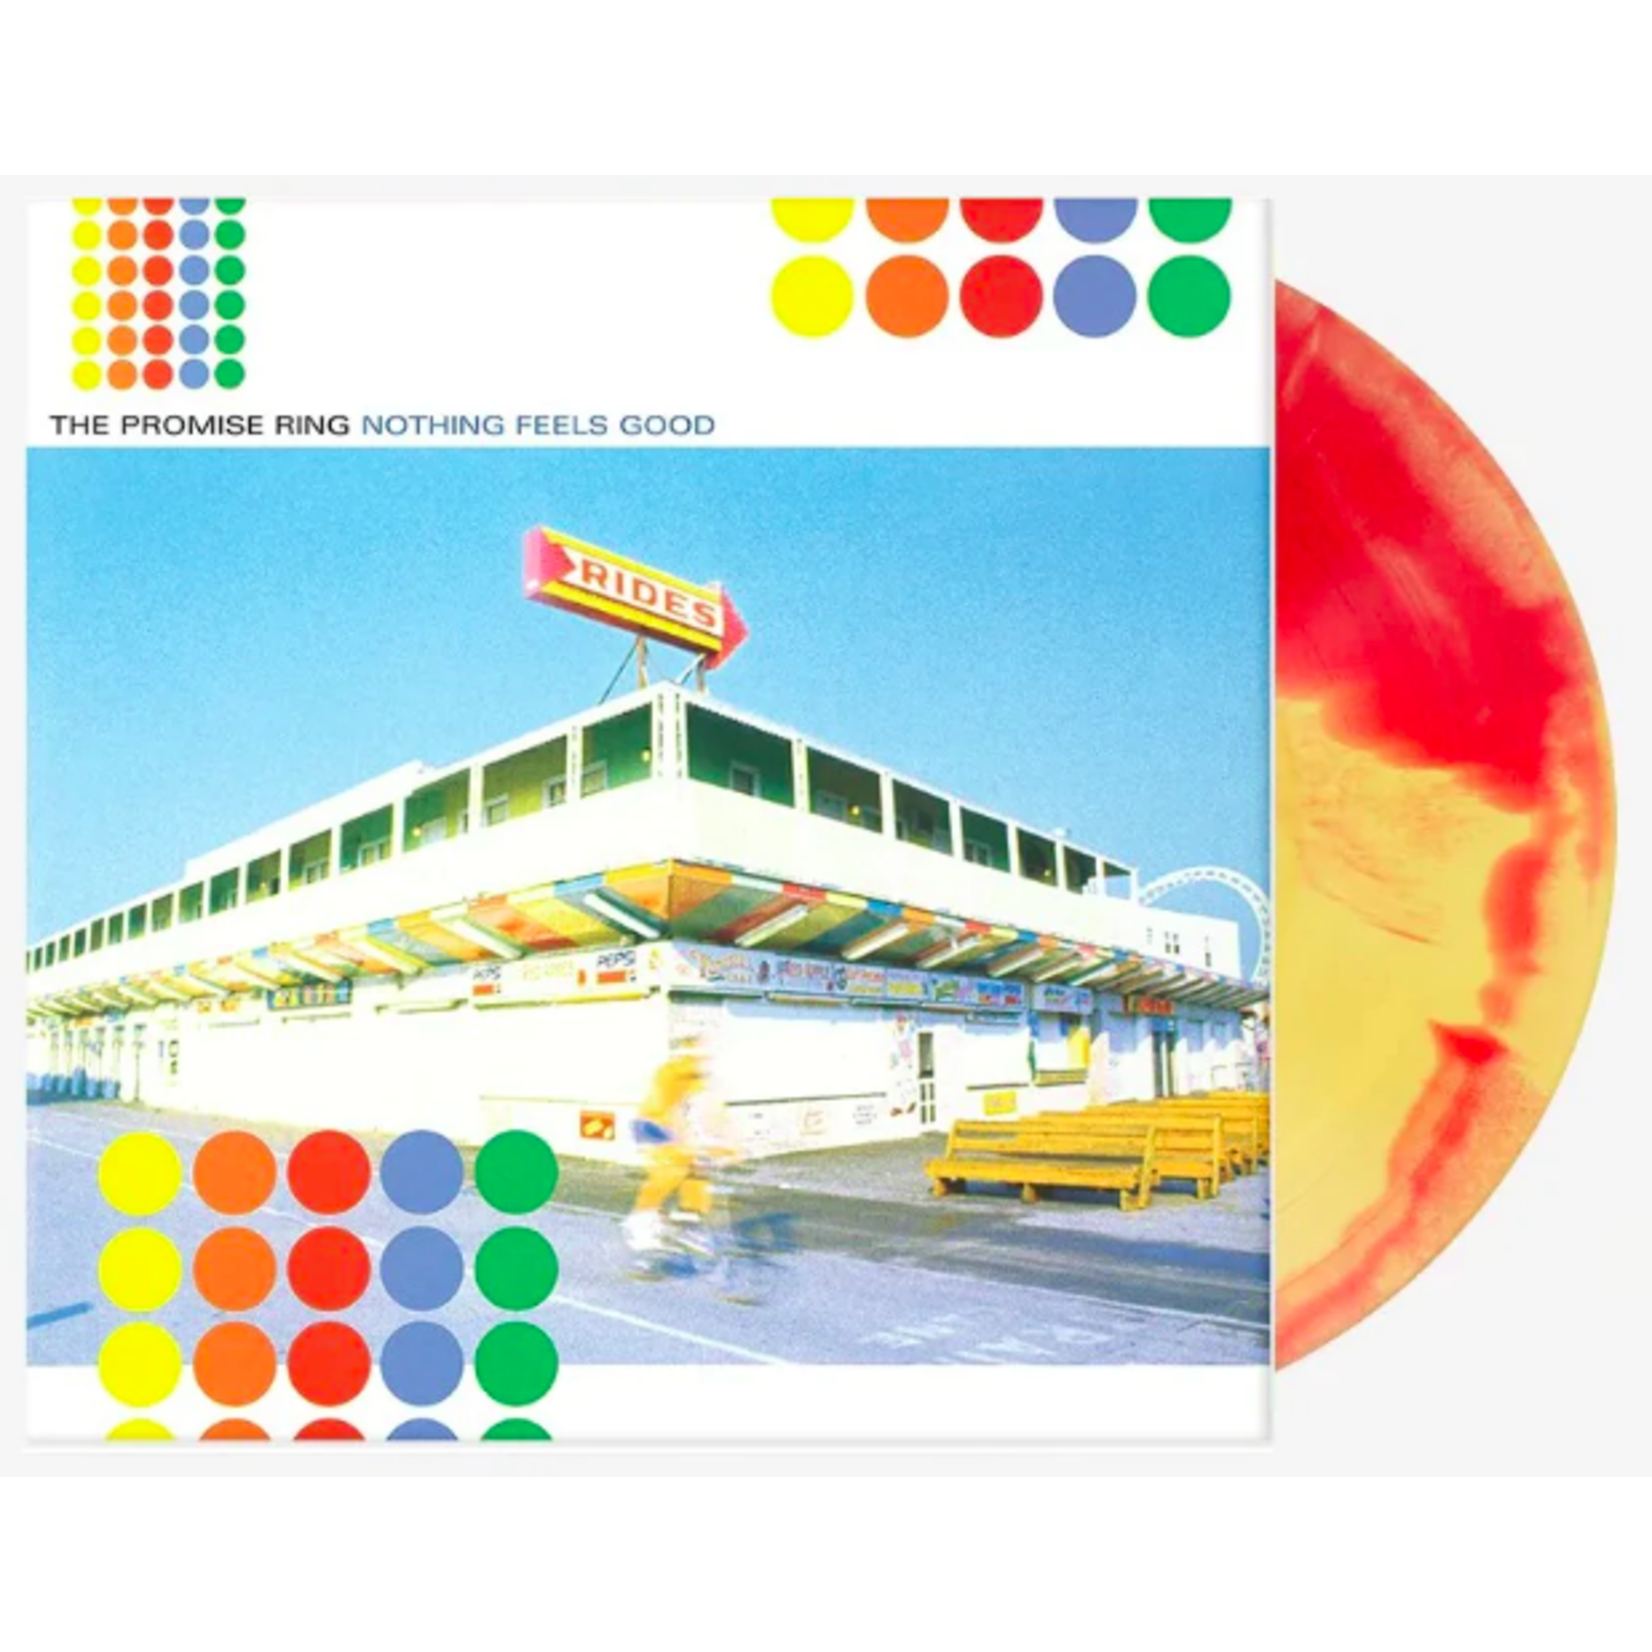 [New] Promise Ring - Nothing Feels Good (25th Anniversary, colour vinyl)